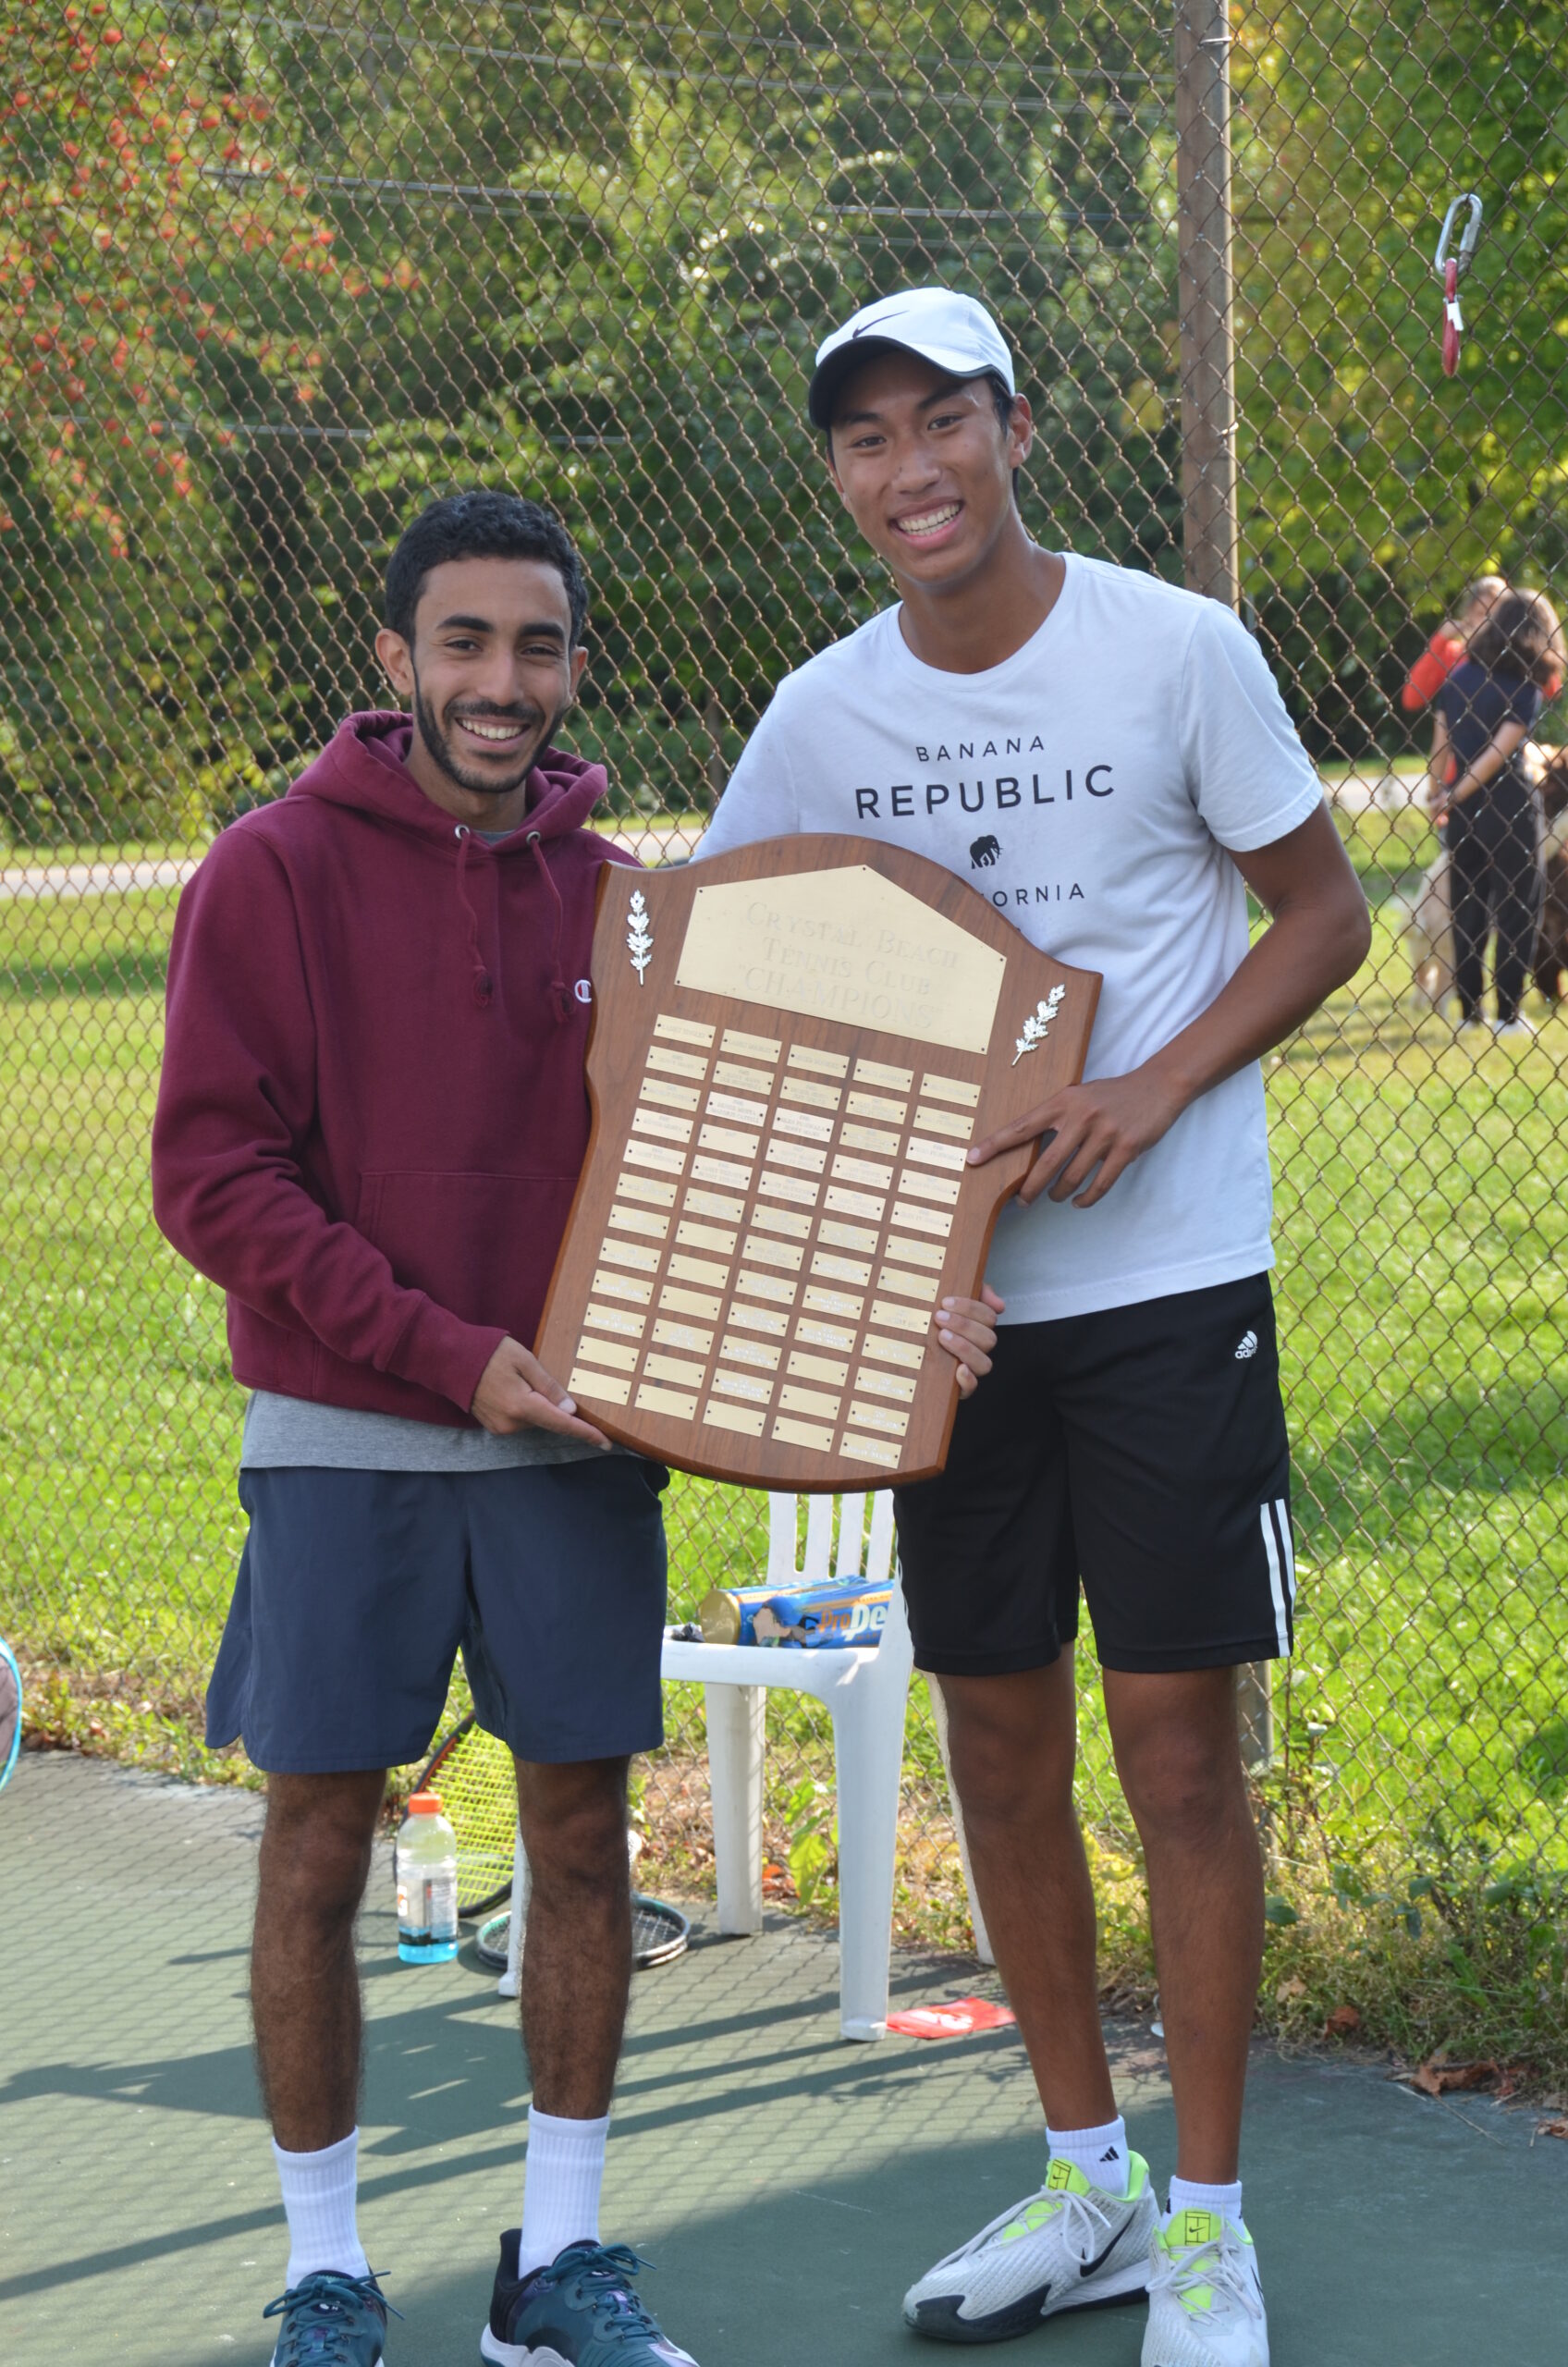 The 2021 Men's Single's Finalists - Othman and Jacob